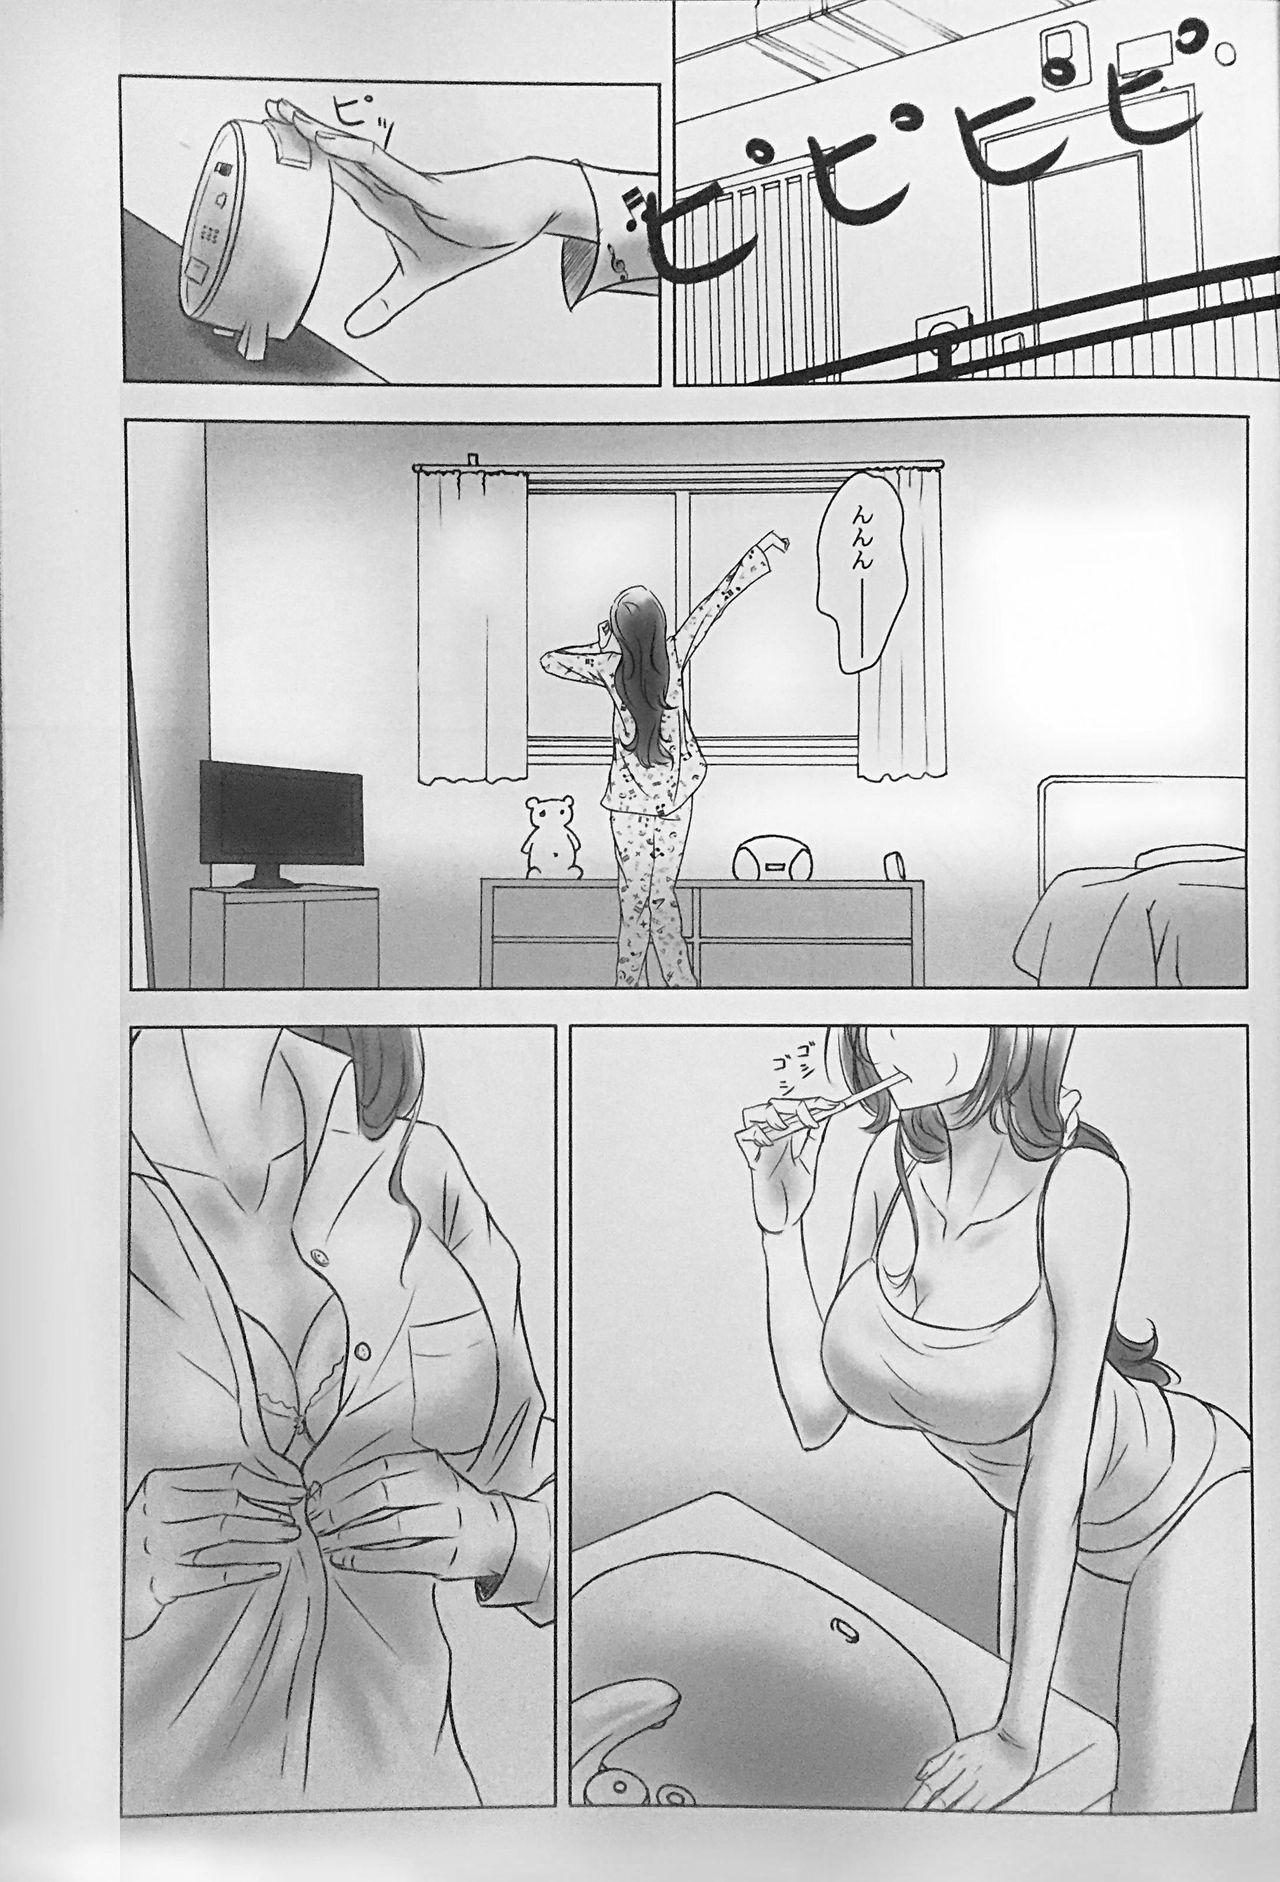 Super Hot Porn Two Hearts You're not alone #2 - Bleach Mask - Page 3